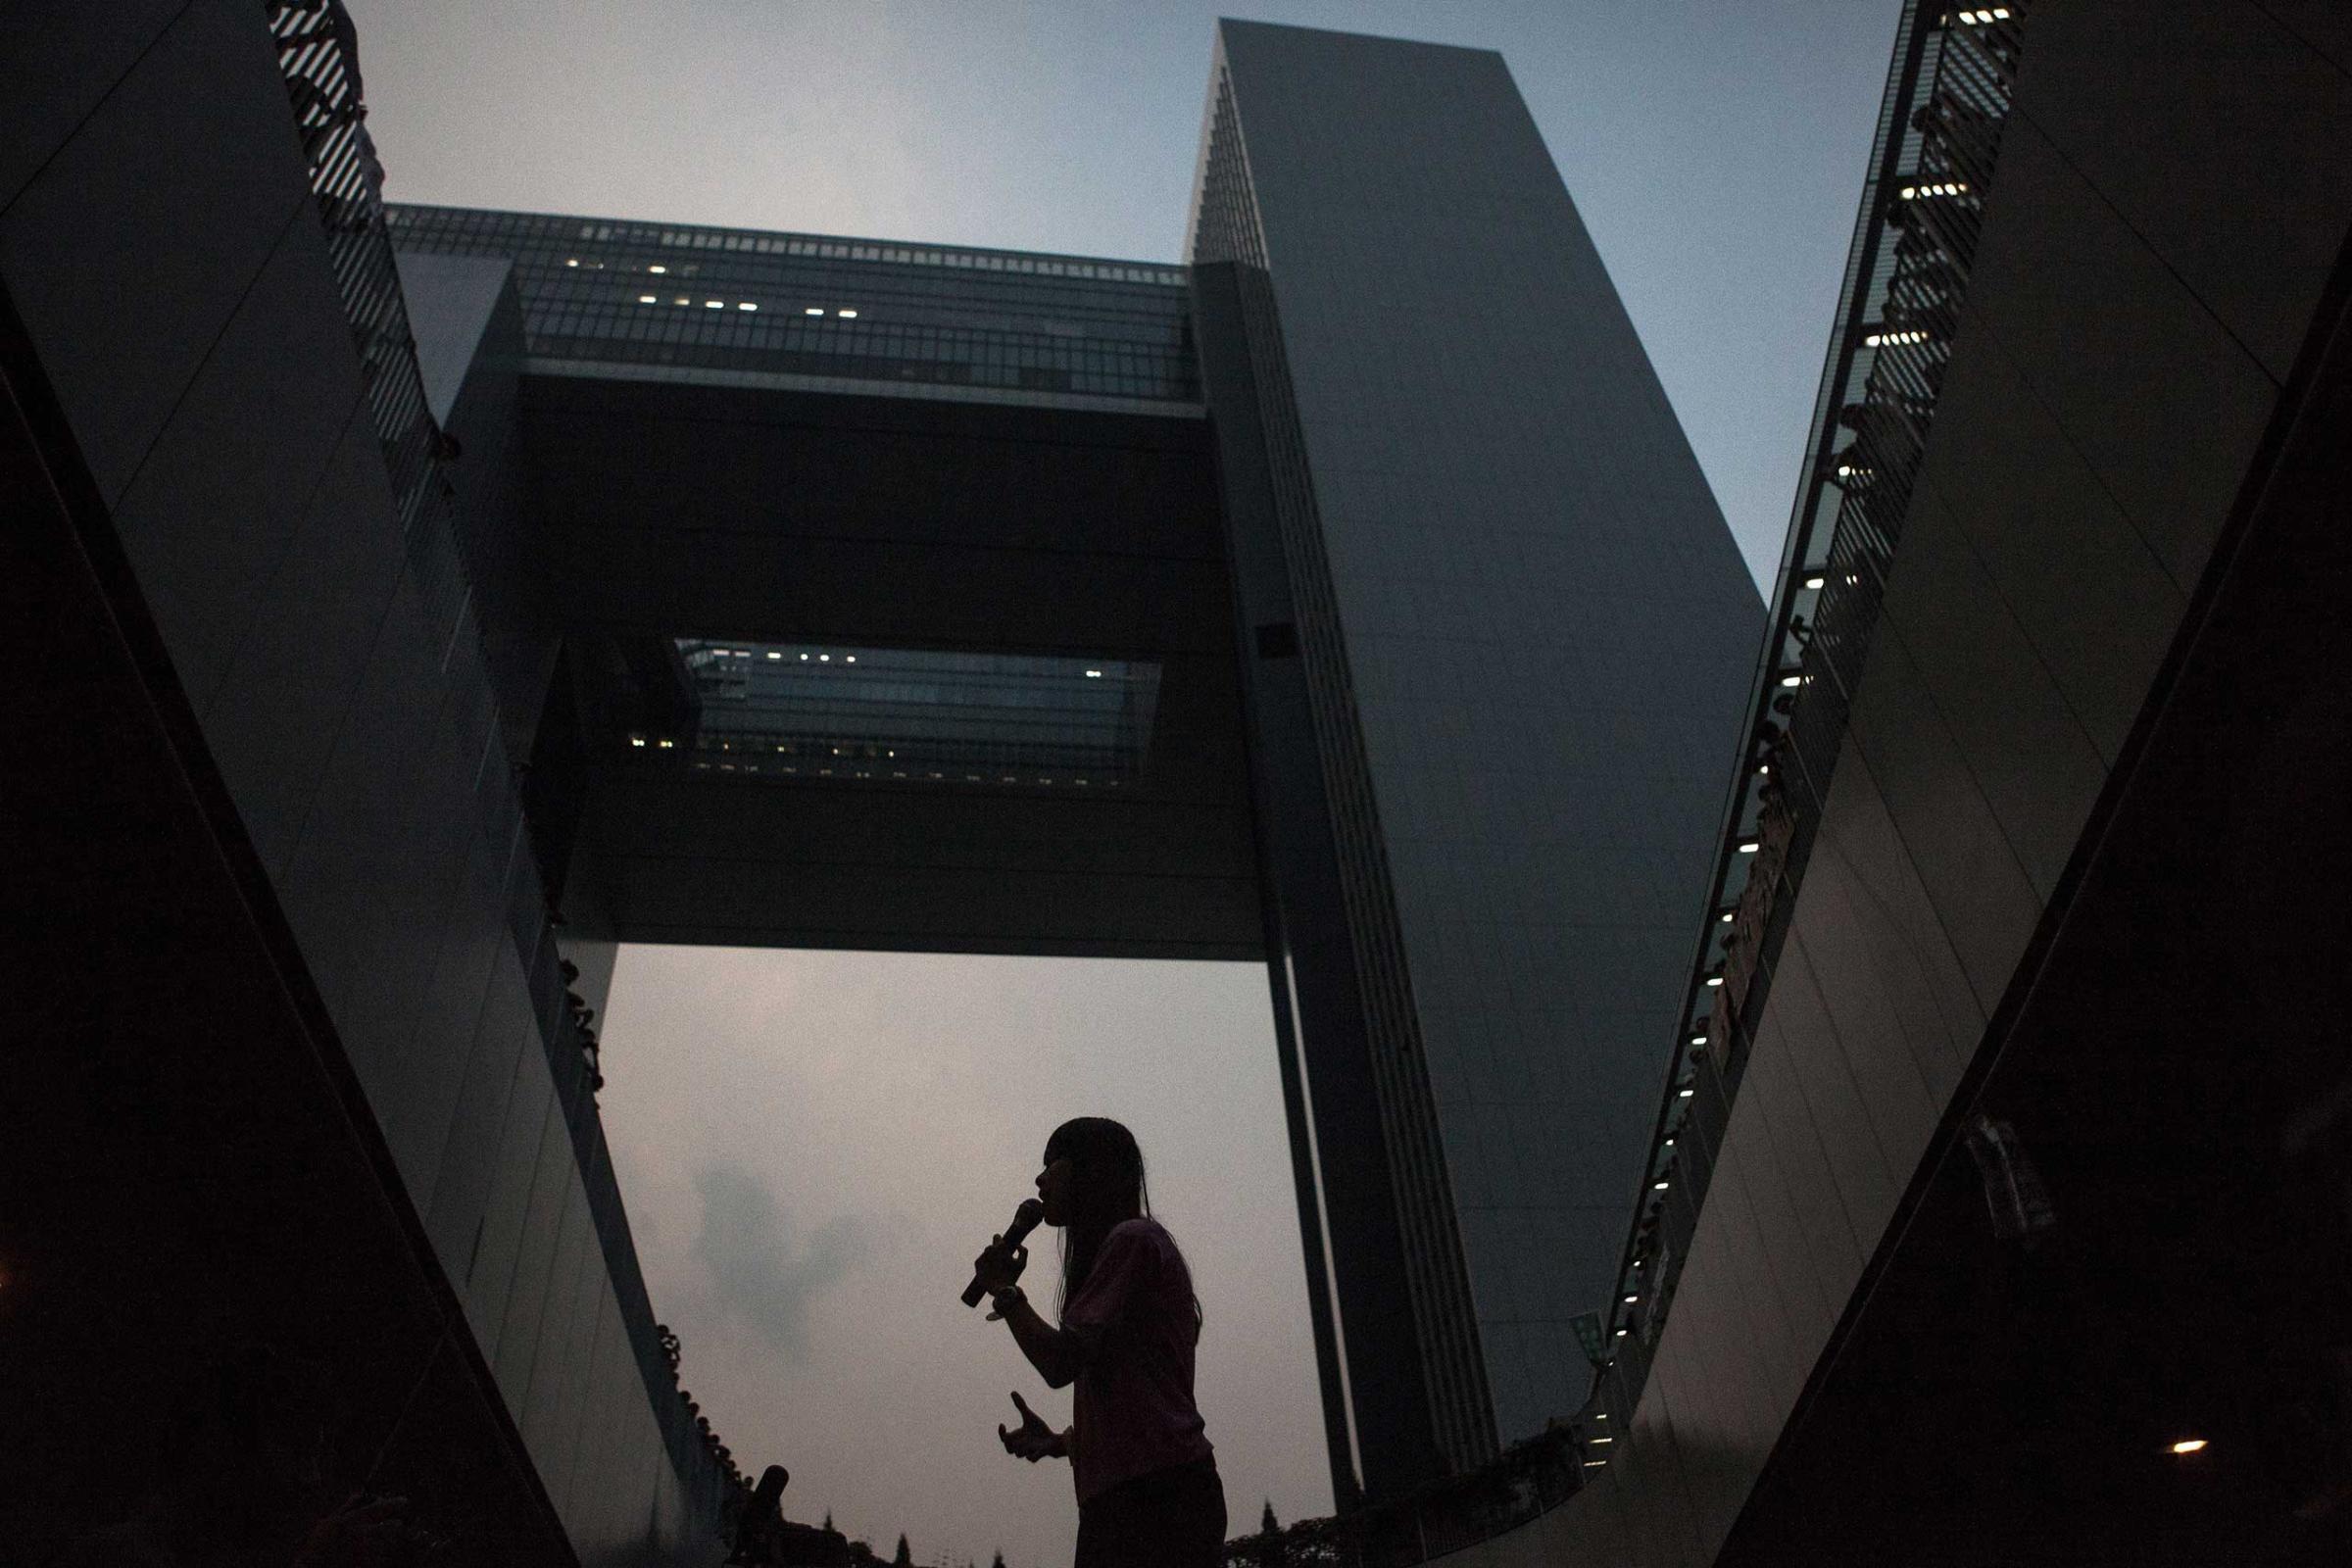 A pro-democracy protestor speaks to the crowd in front of the government offices in Hong Kong on Sept. 30, 2014.